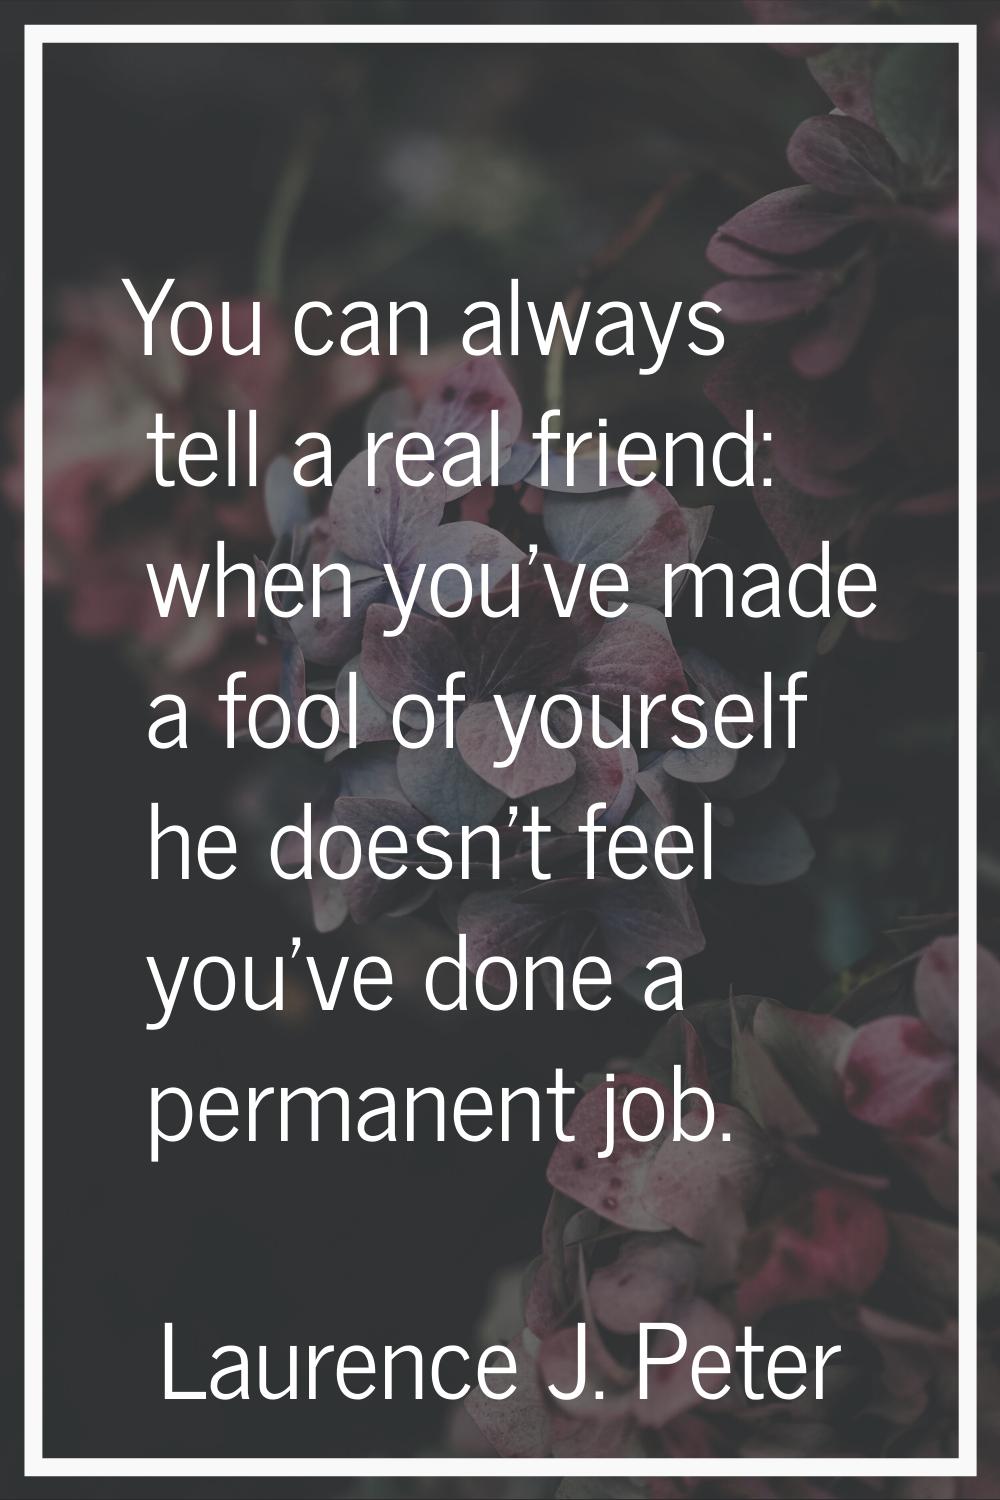 You can always tell a real friend: when you've made a fool of yourself he doesn't feel you've done 